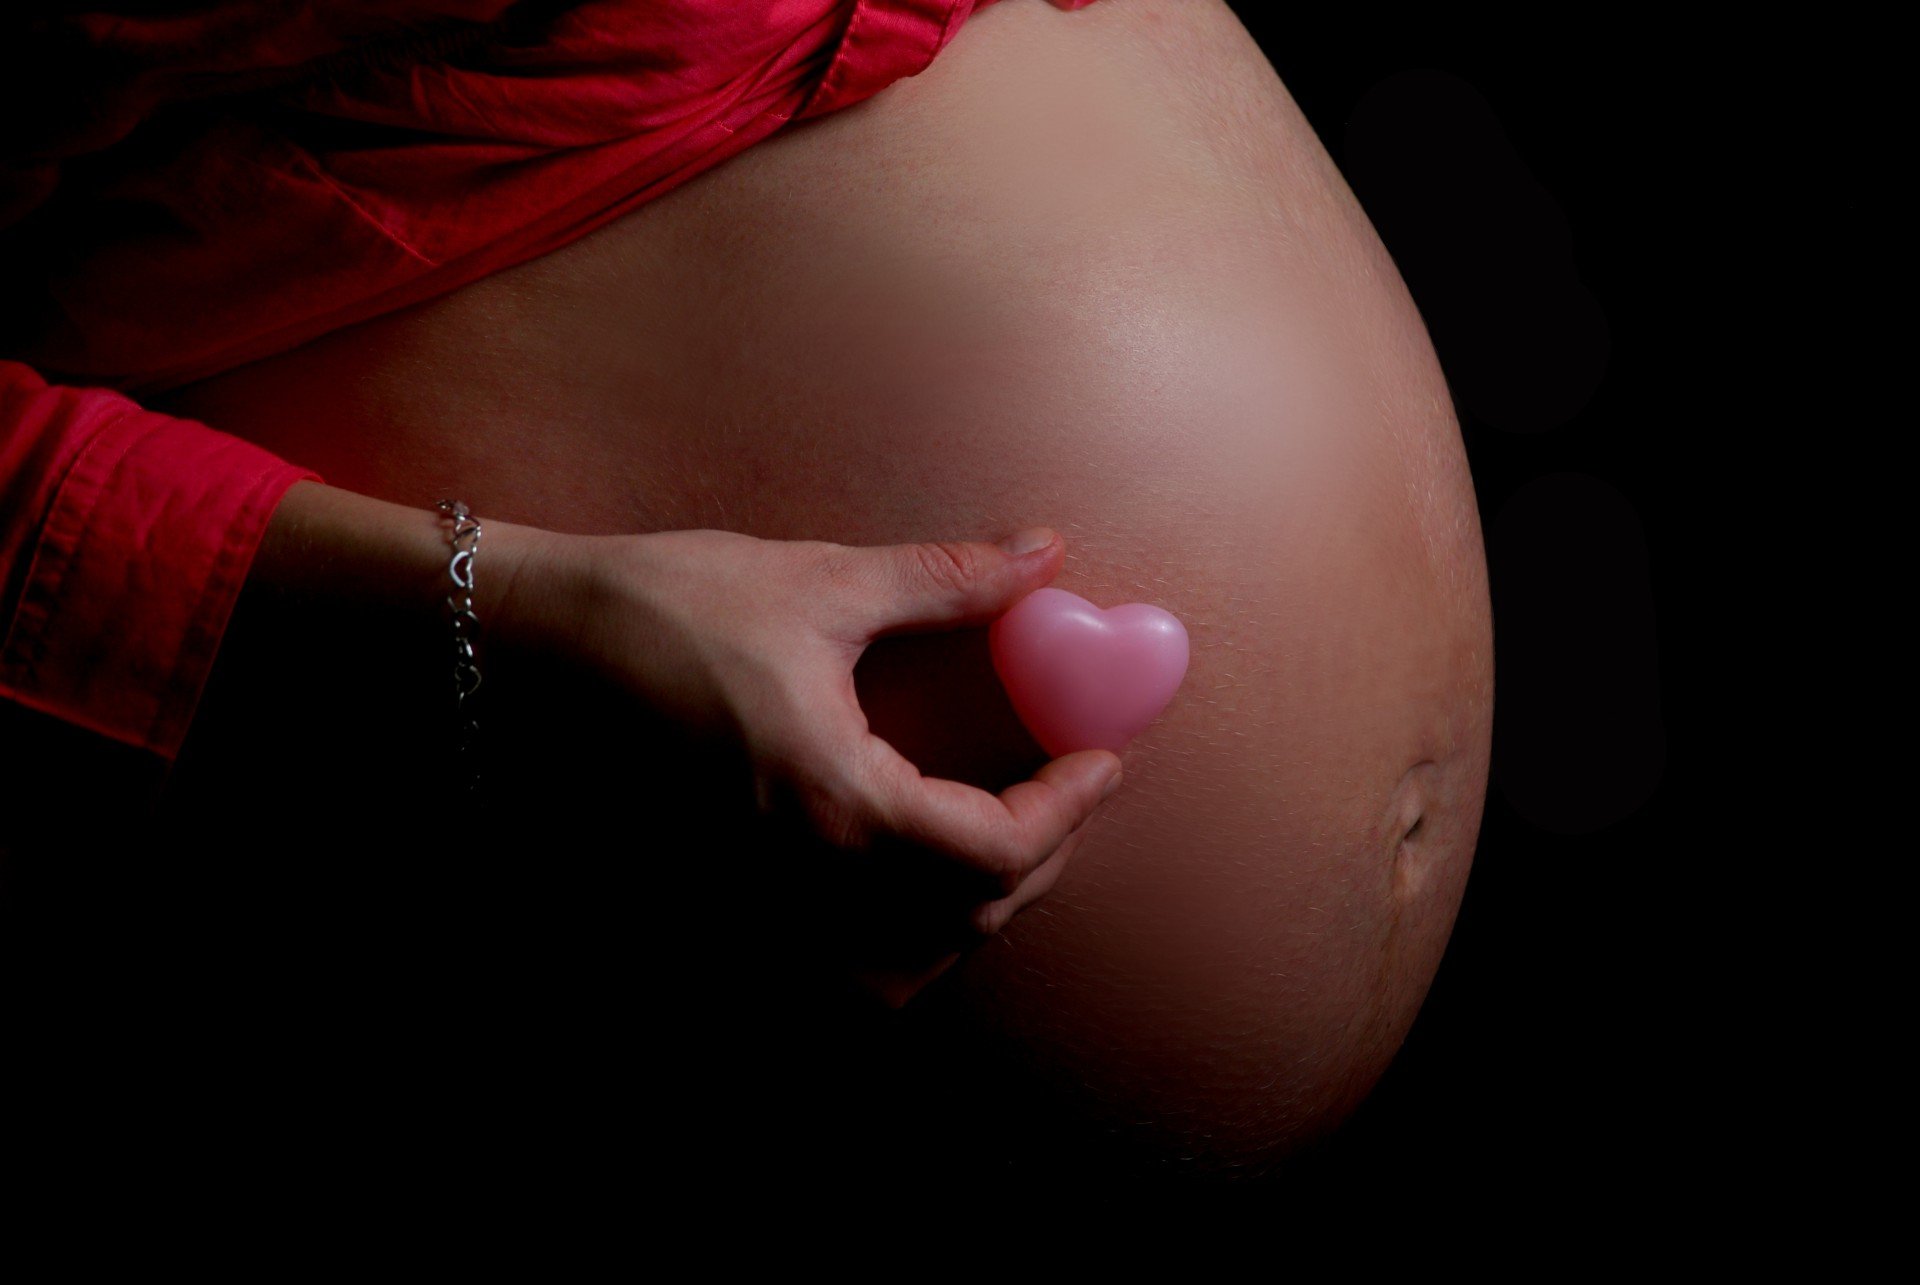 A person showing off an exposed pregnant baby bump while holding a little pink heart against it | Photo: Needpix